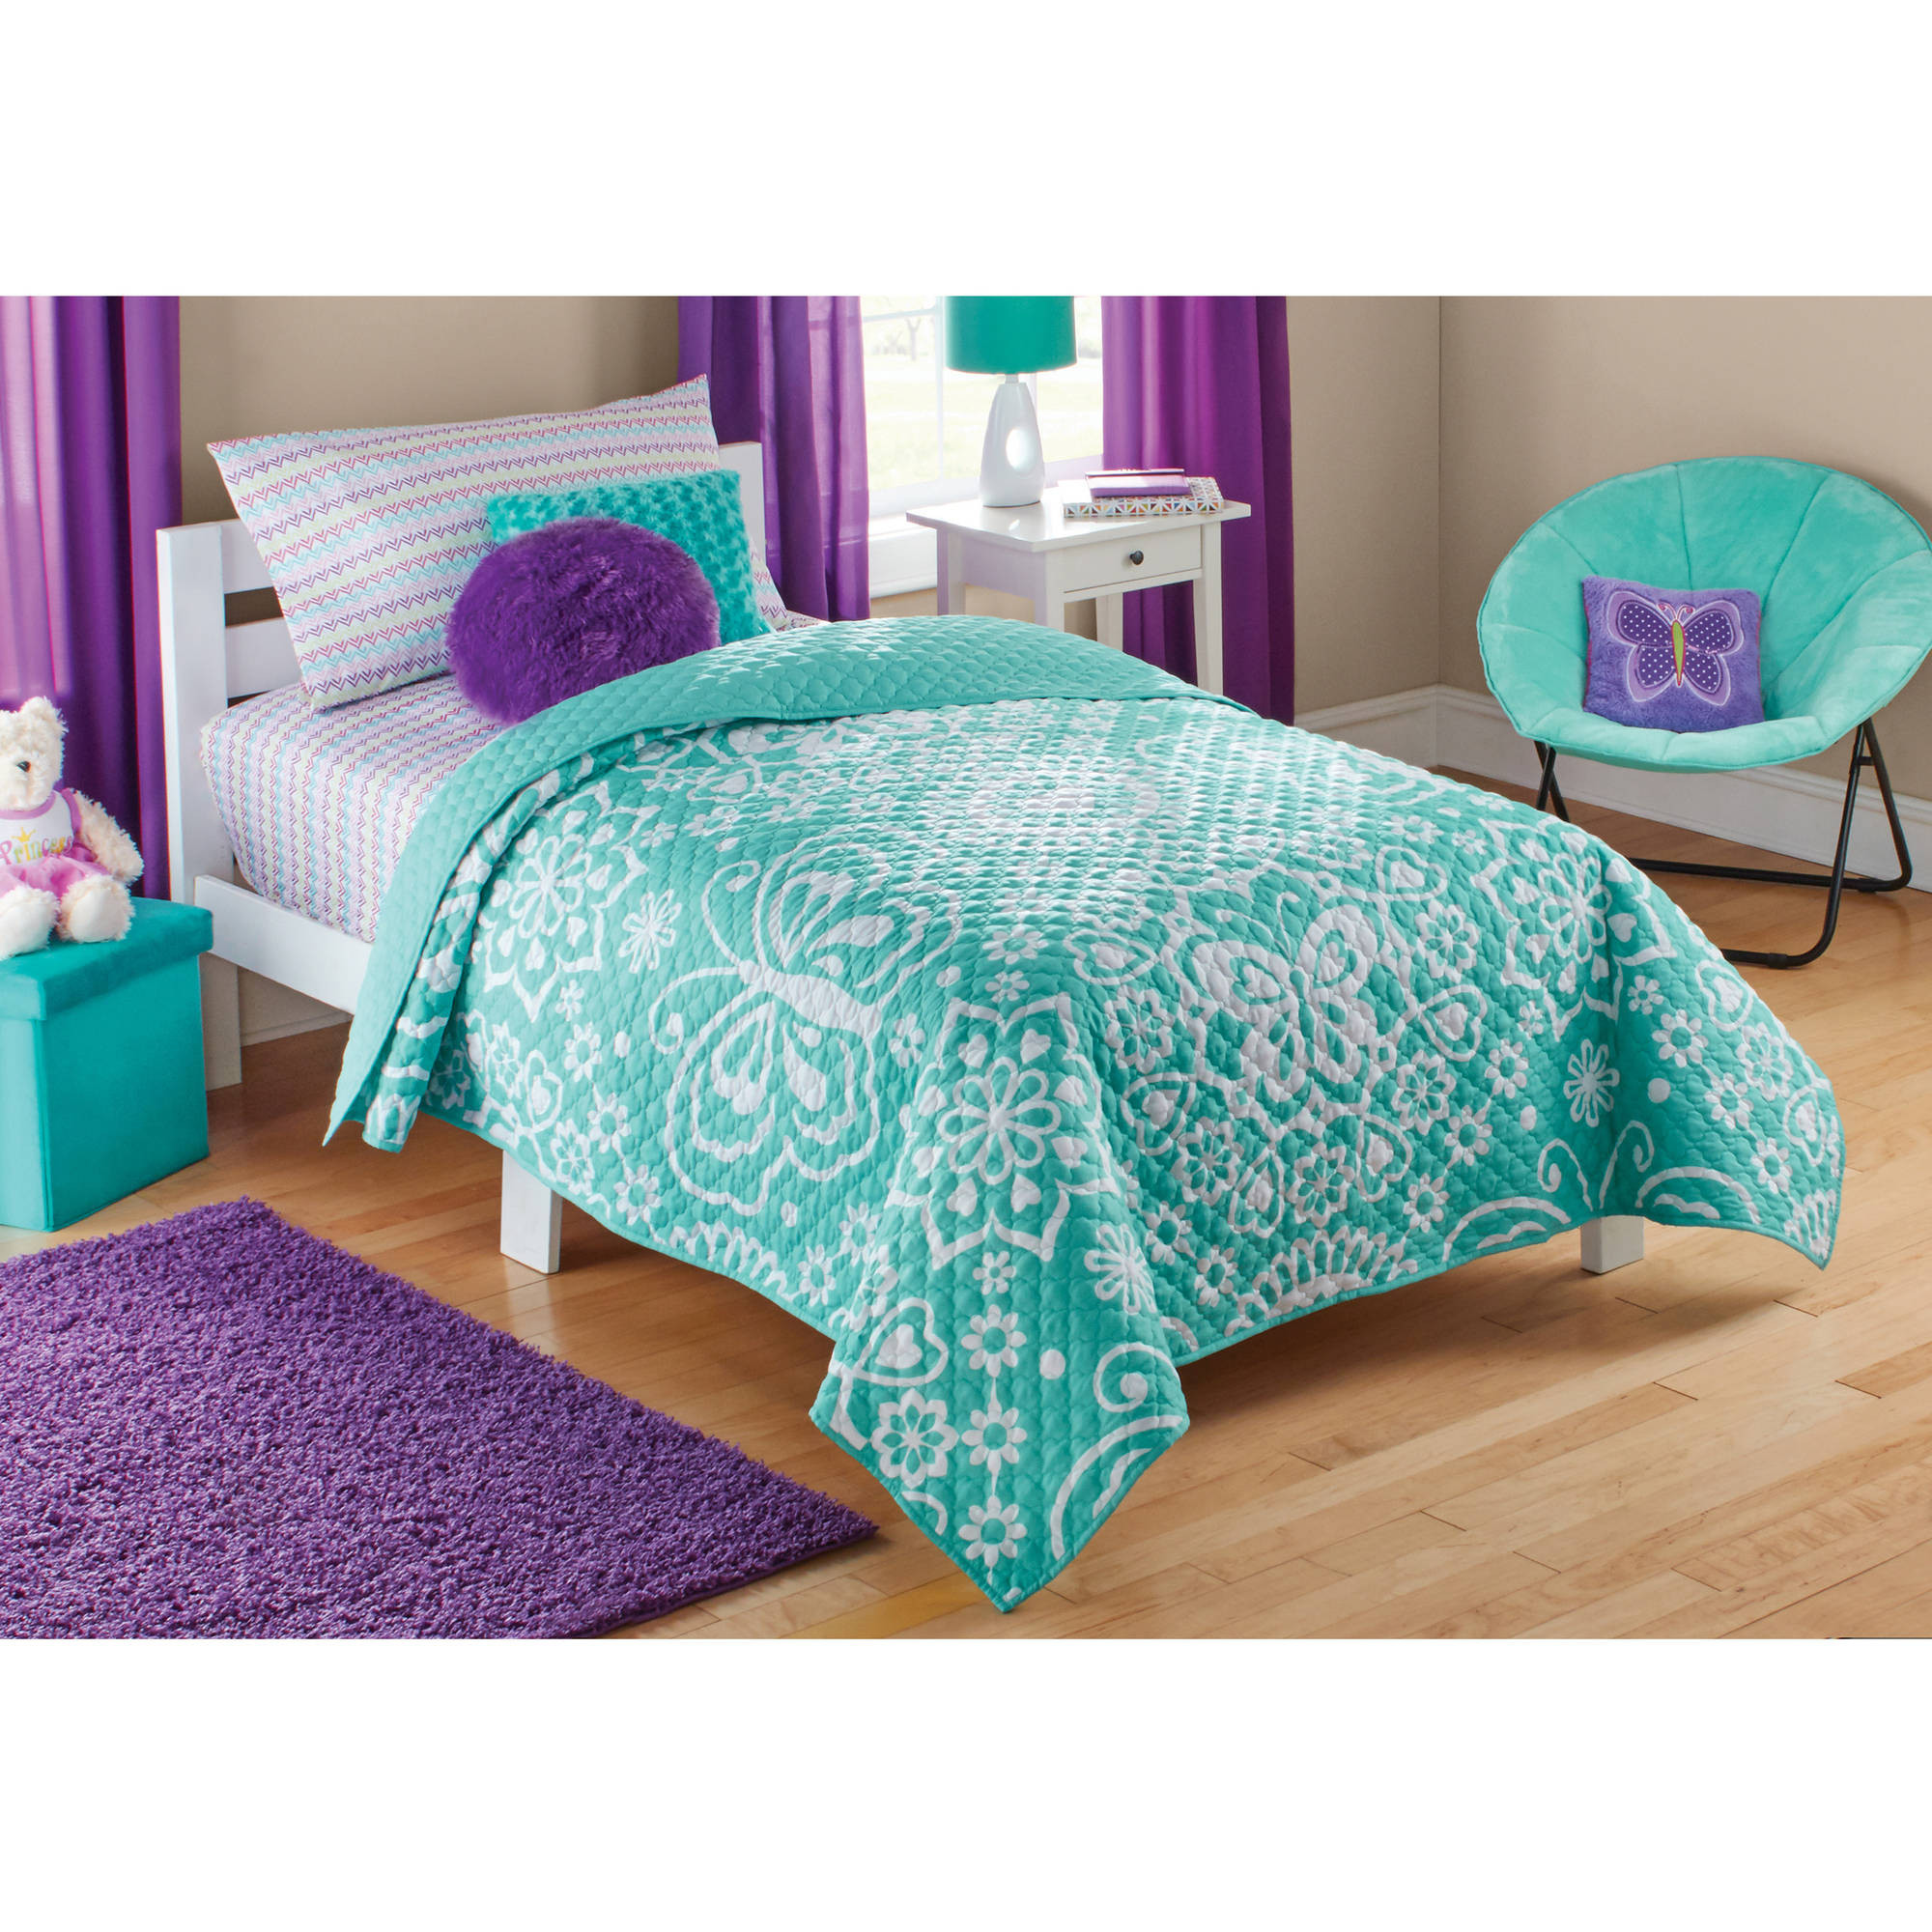 Walmart Girl Bedroom Sets
 Mainstays Kids Purple Butterfly Coordinated Bed in a Bag